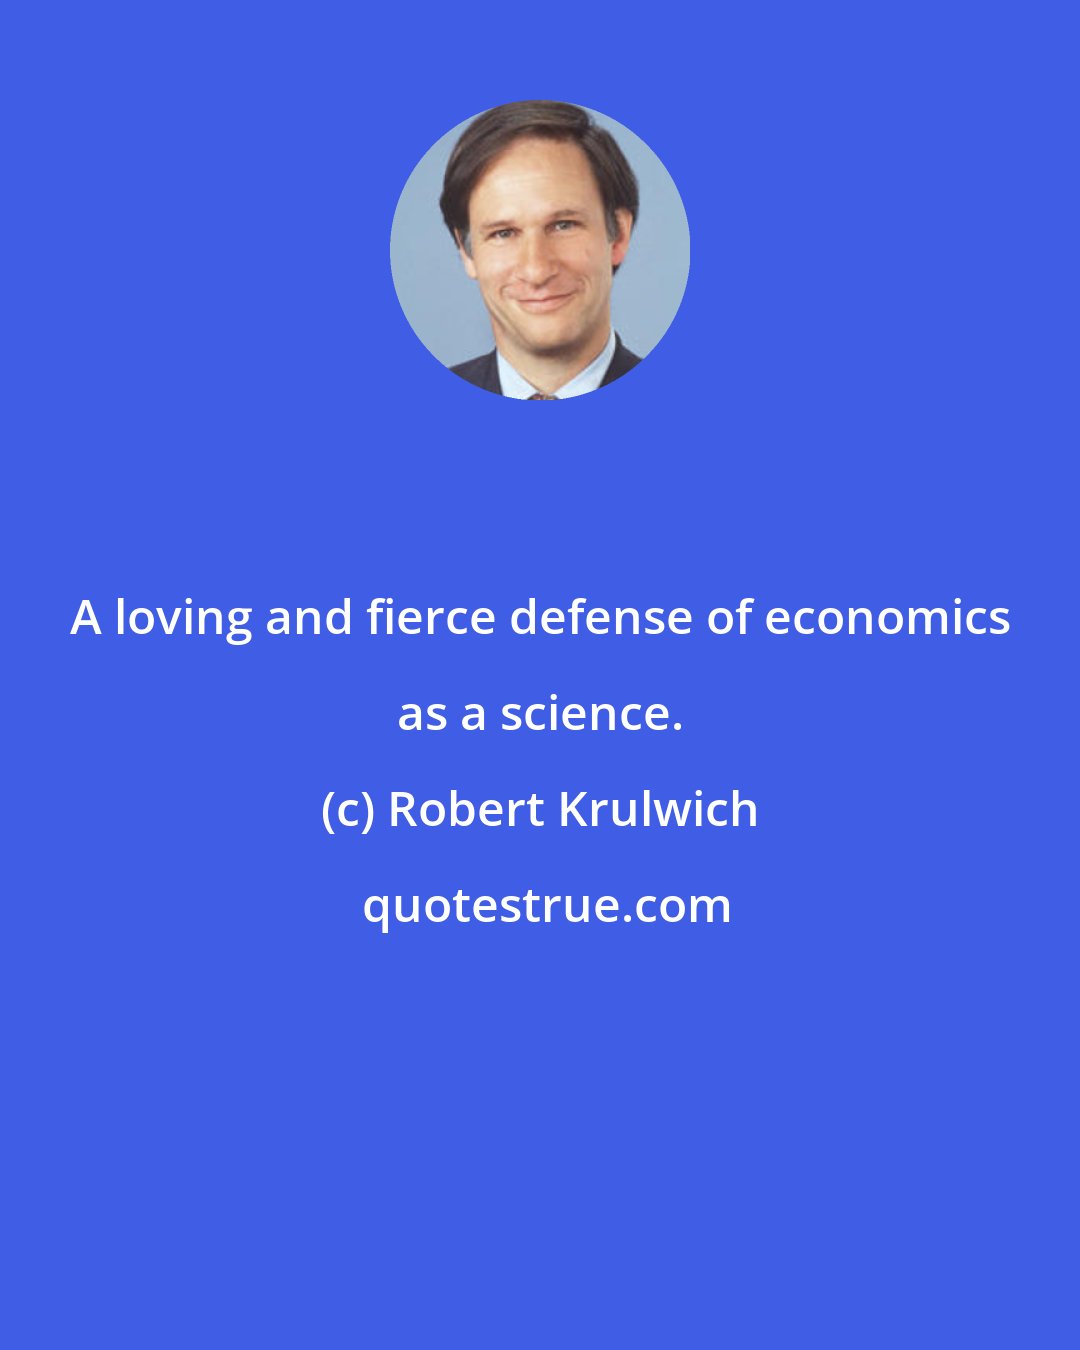 Robert Krulwich: A loving and fierce defense of economics as a science.